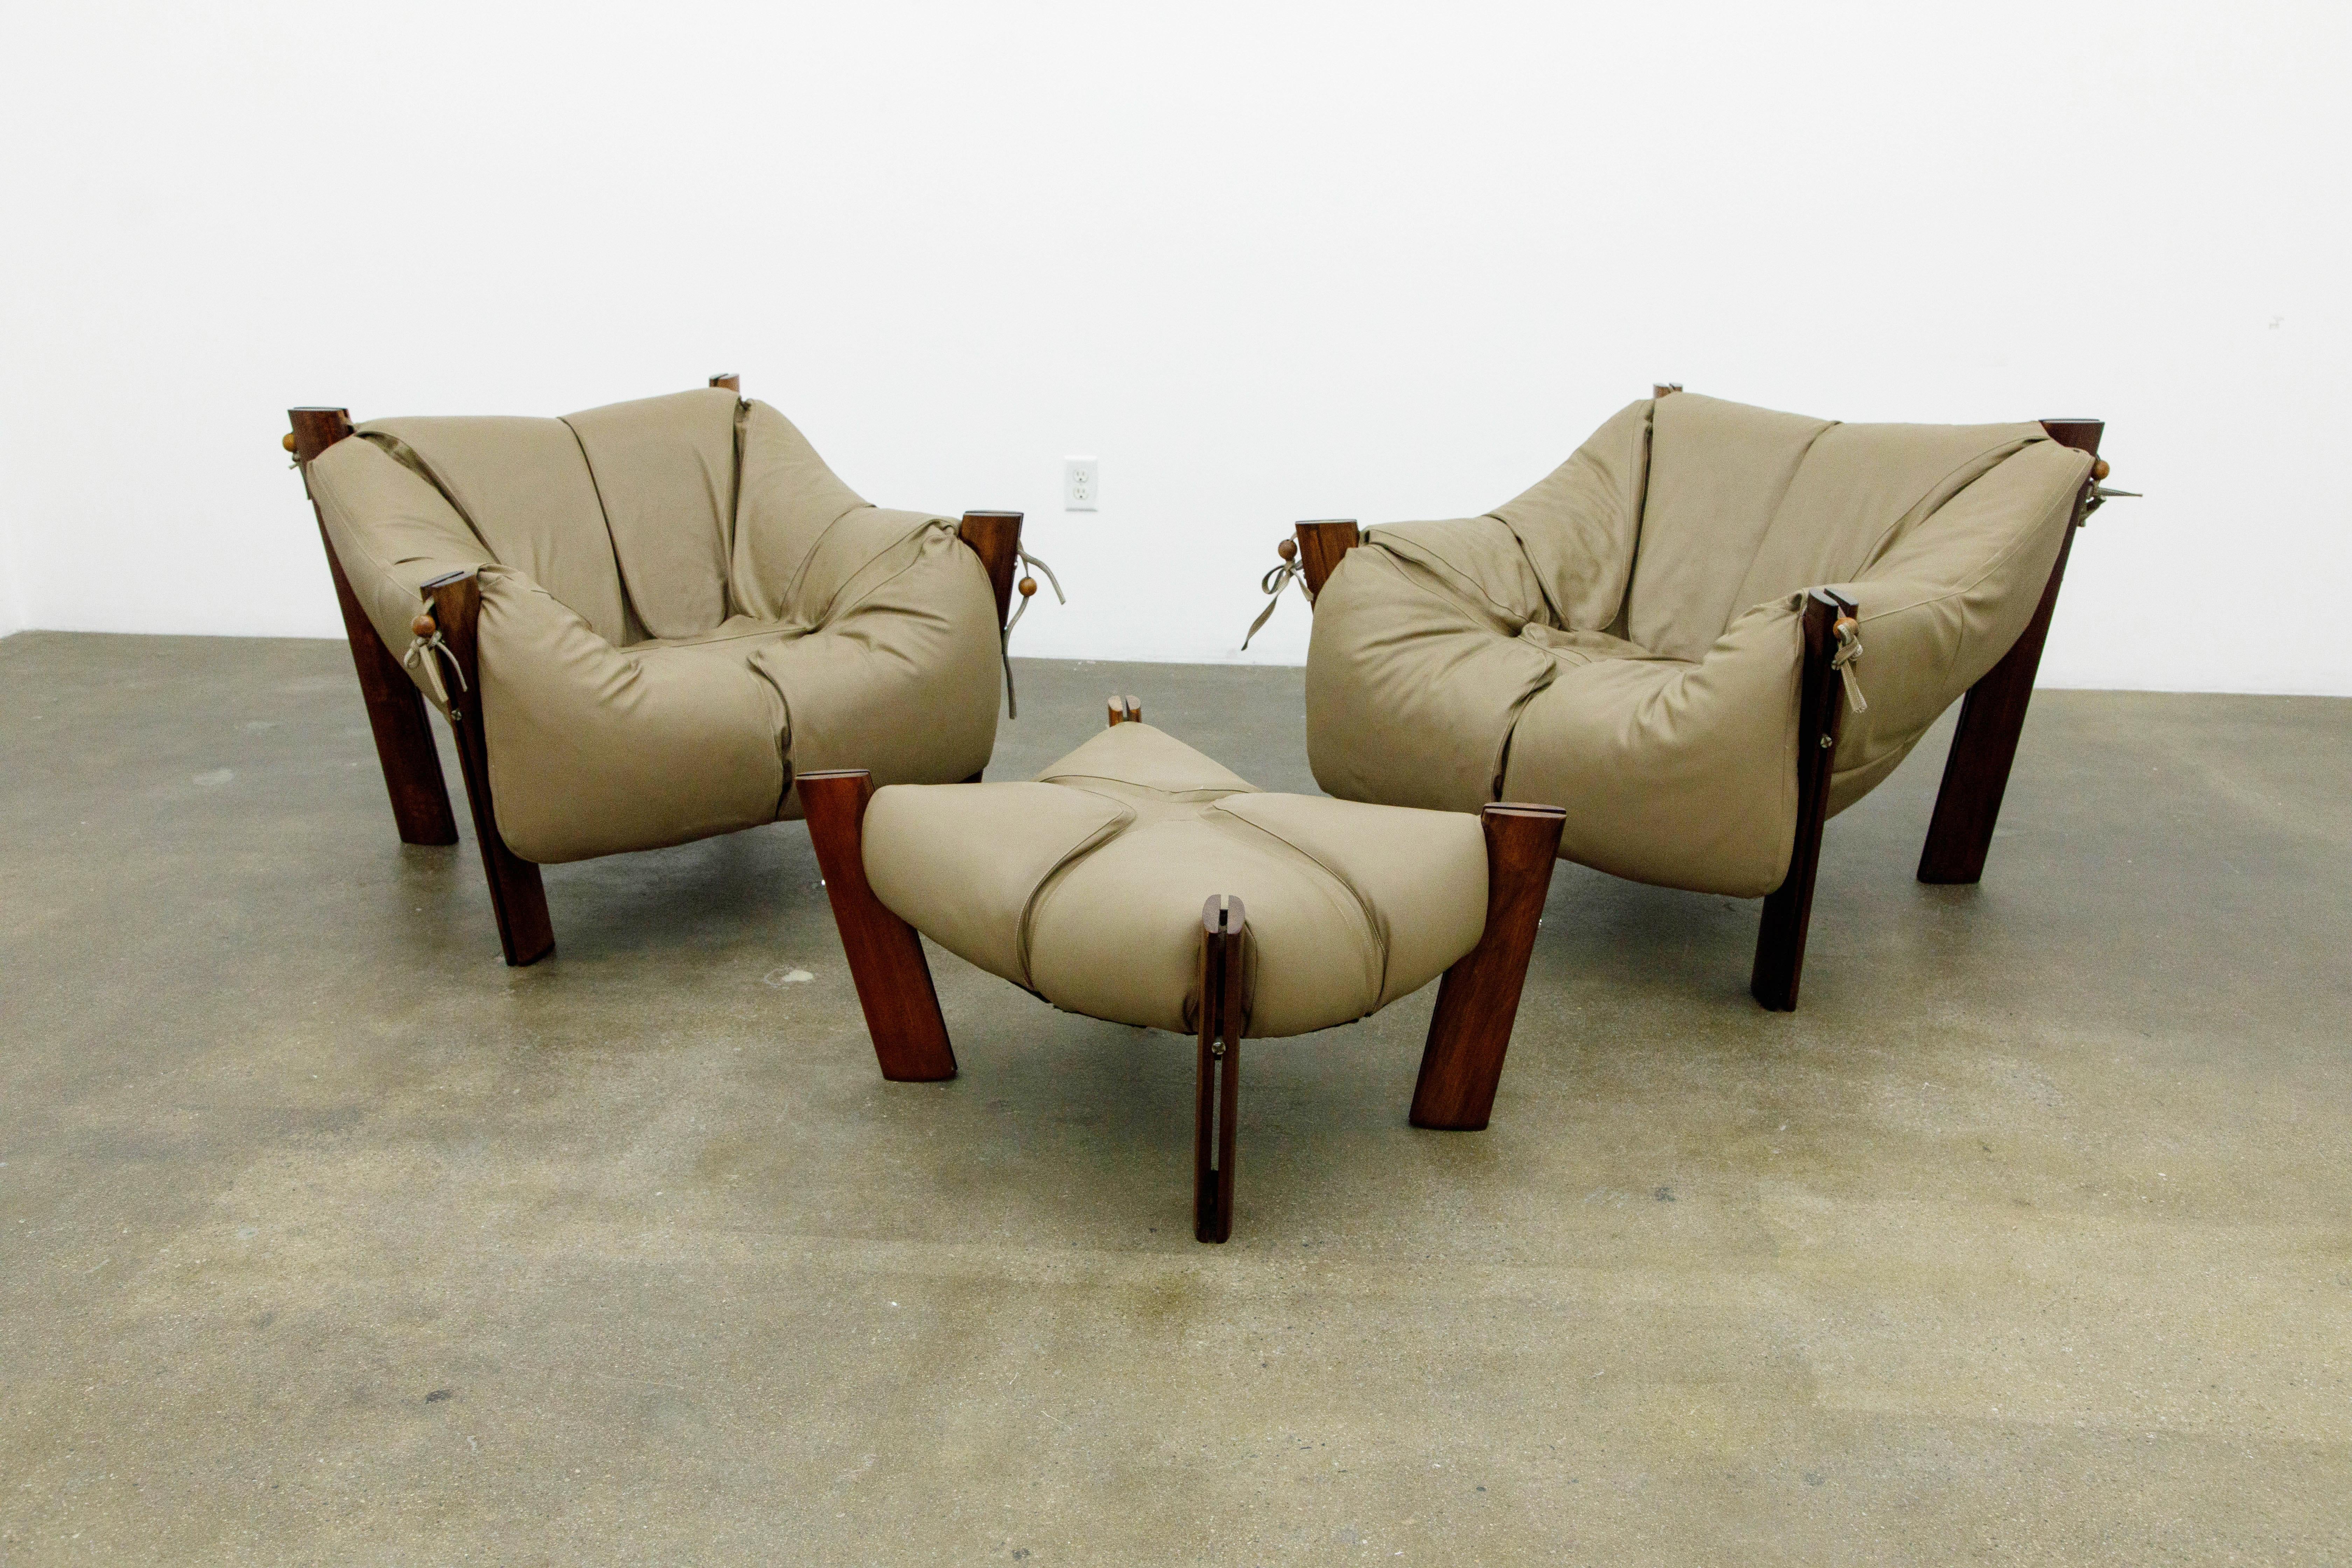 An impressive set of Percival Lafer 'MP-211' lounge chairs (2) and ottoman (1) with original labels, circa 1960s Brazil. The overstuffed lounge chairs are fashioned with leatherette ties secured with rosewood beads. This model is regarded for its